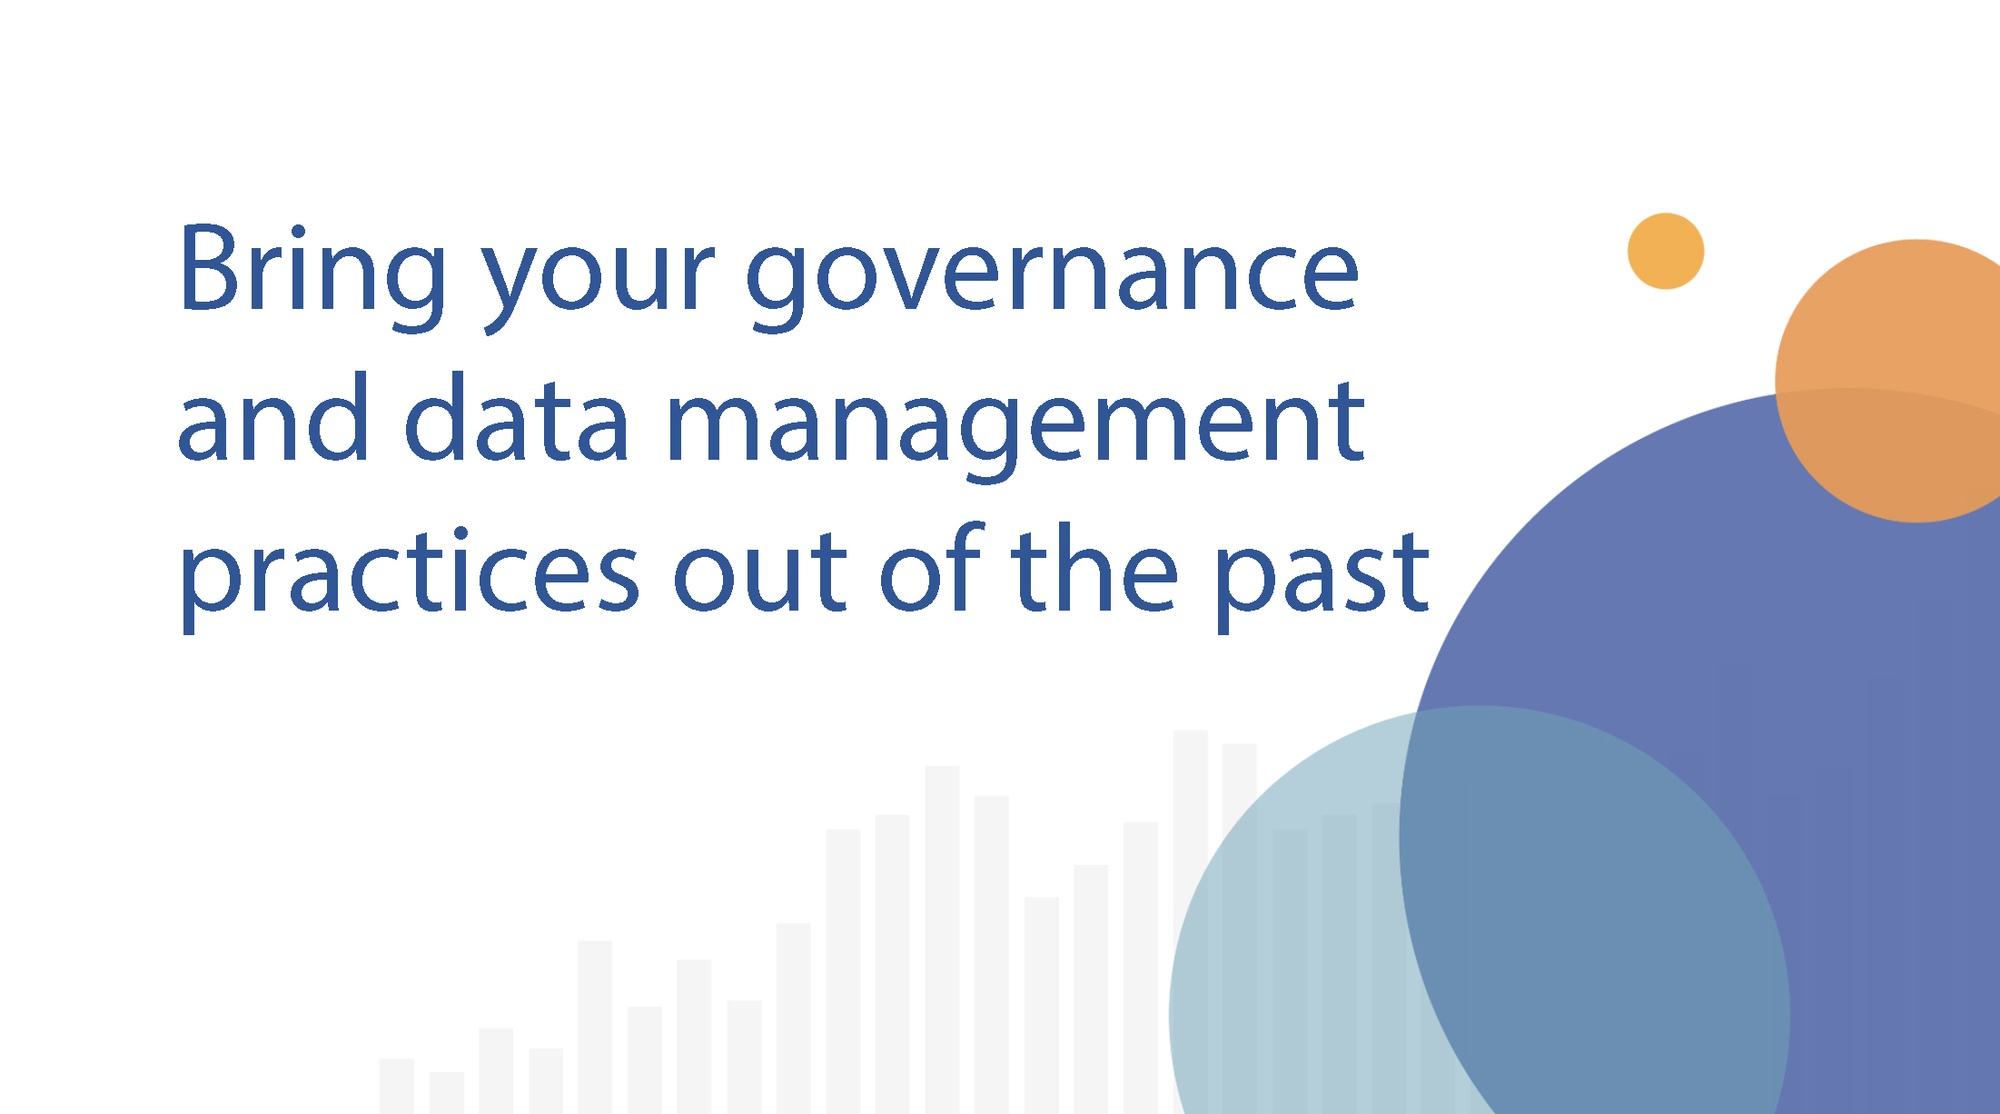 Bring your governance and data management practices out of the past